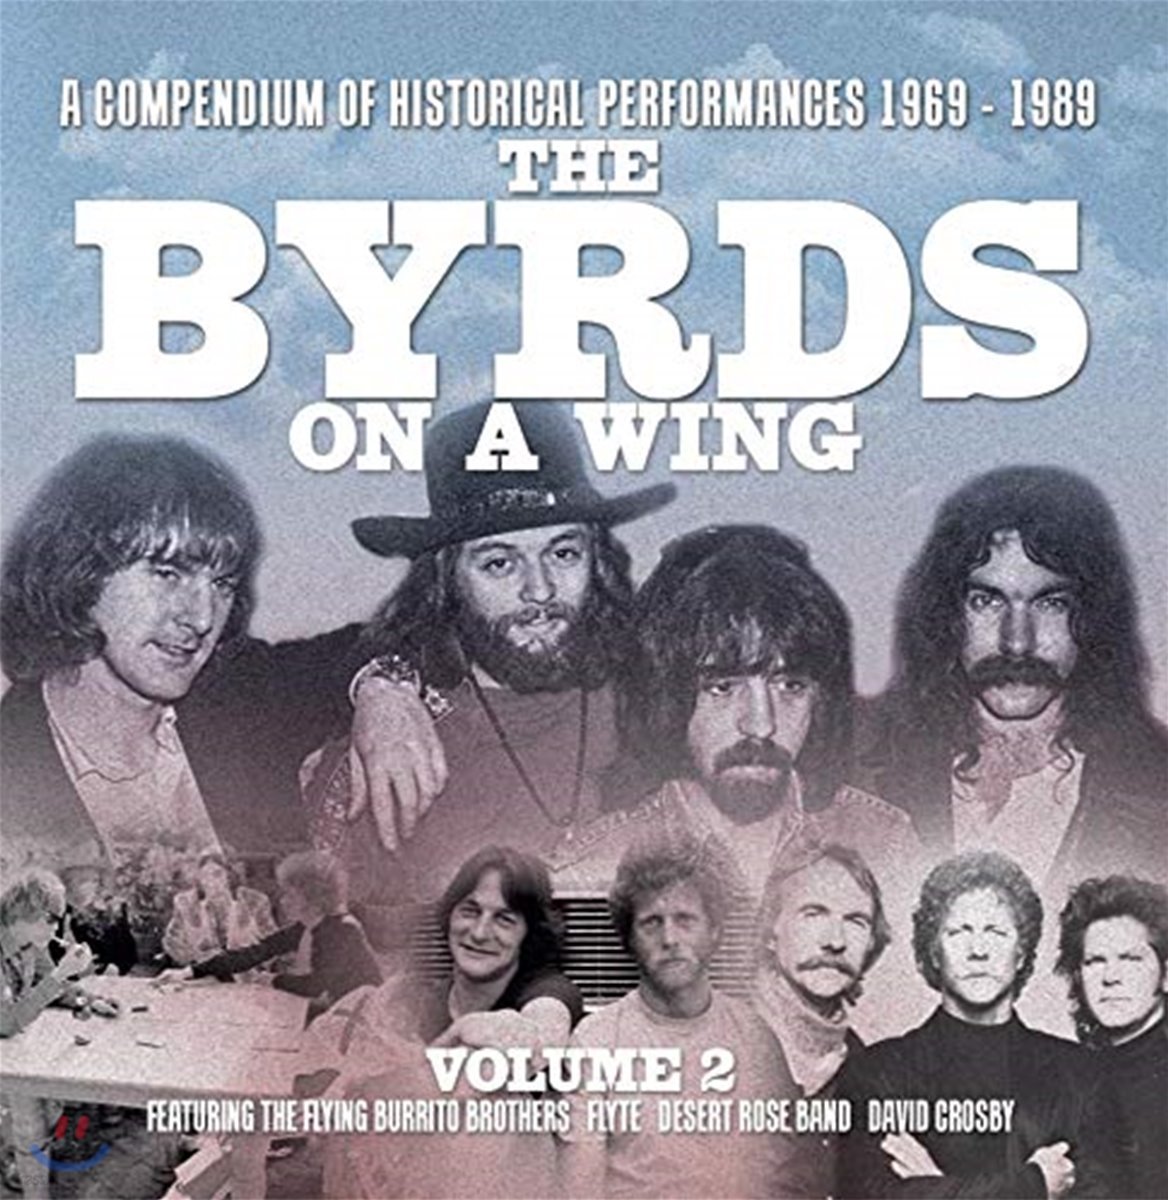 The Byrds (더 버즈) - The Byrds on A Wing Volume 2 [6CD 박스세트]